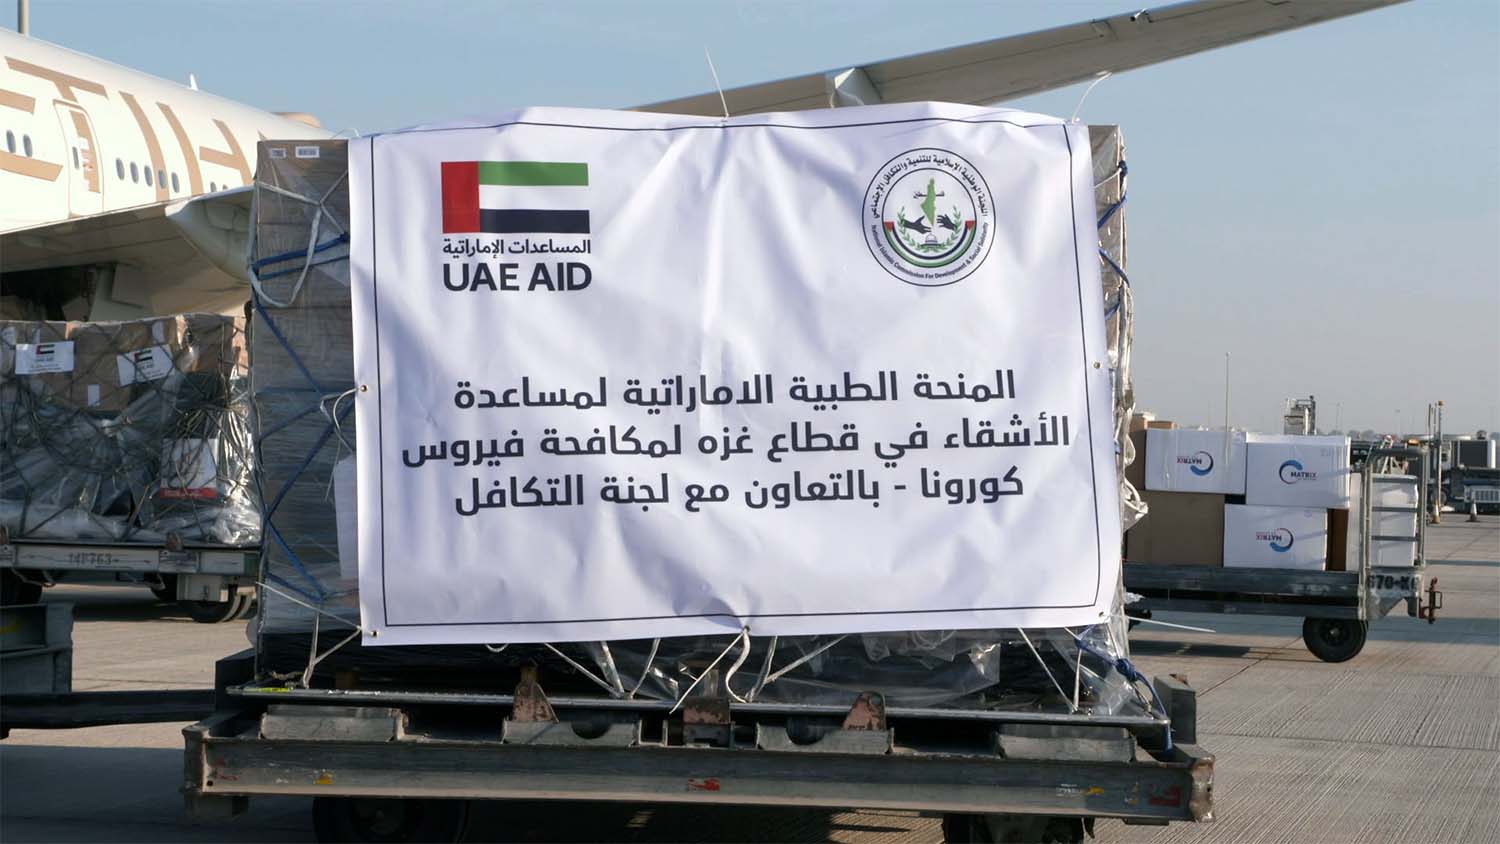 The UAE has also provided over 1,675 tonnes of assistance to more than 120 countries